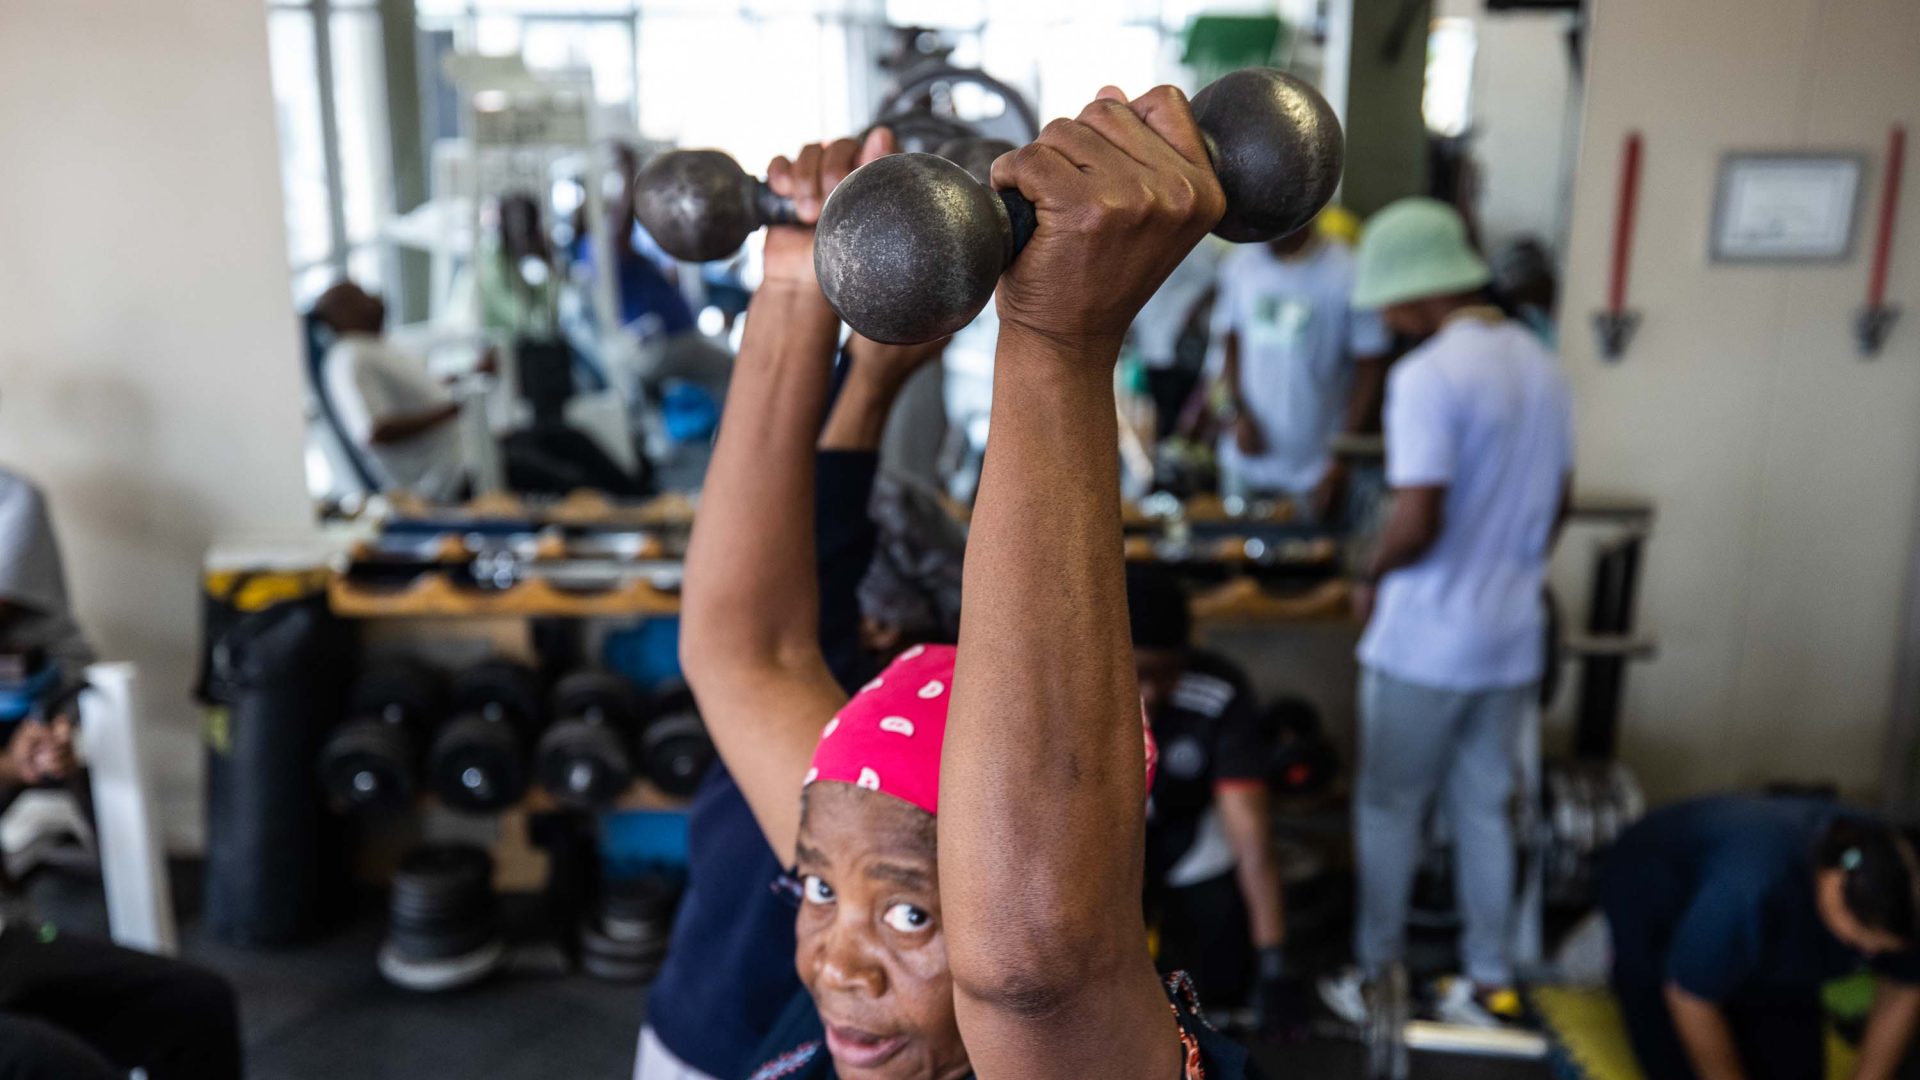 A boxing granny raises some dumbbells above her head.